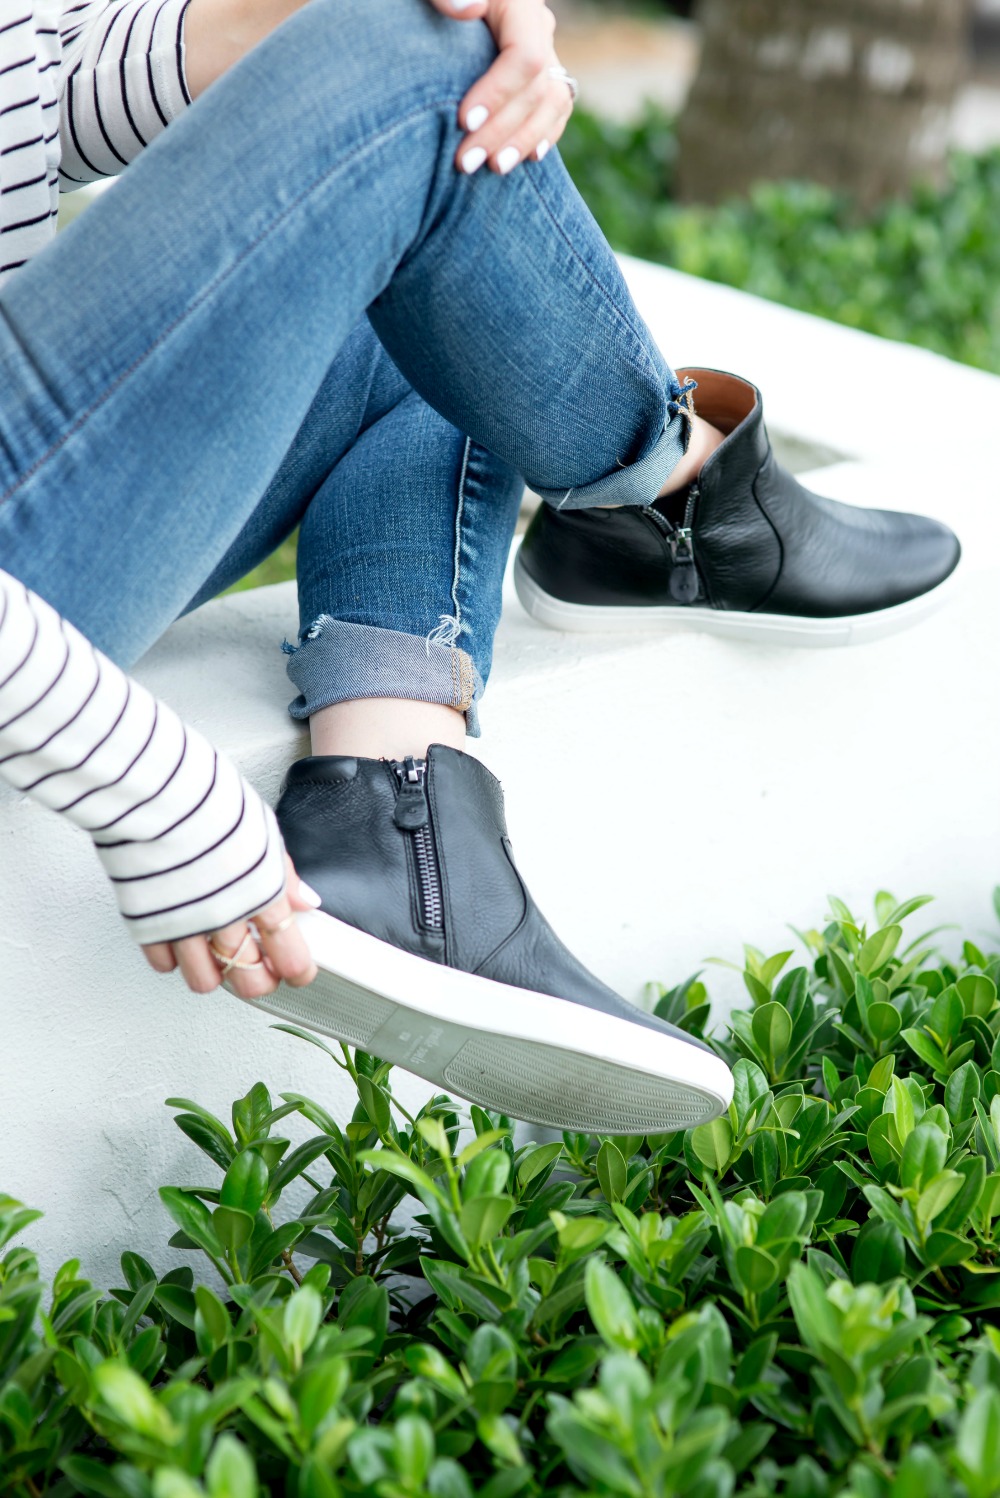 Update your sneaks game with a pair of chic black high tops // the modern savvy, a life & style blog based in florida